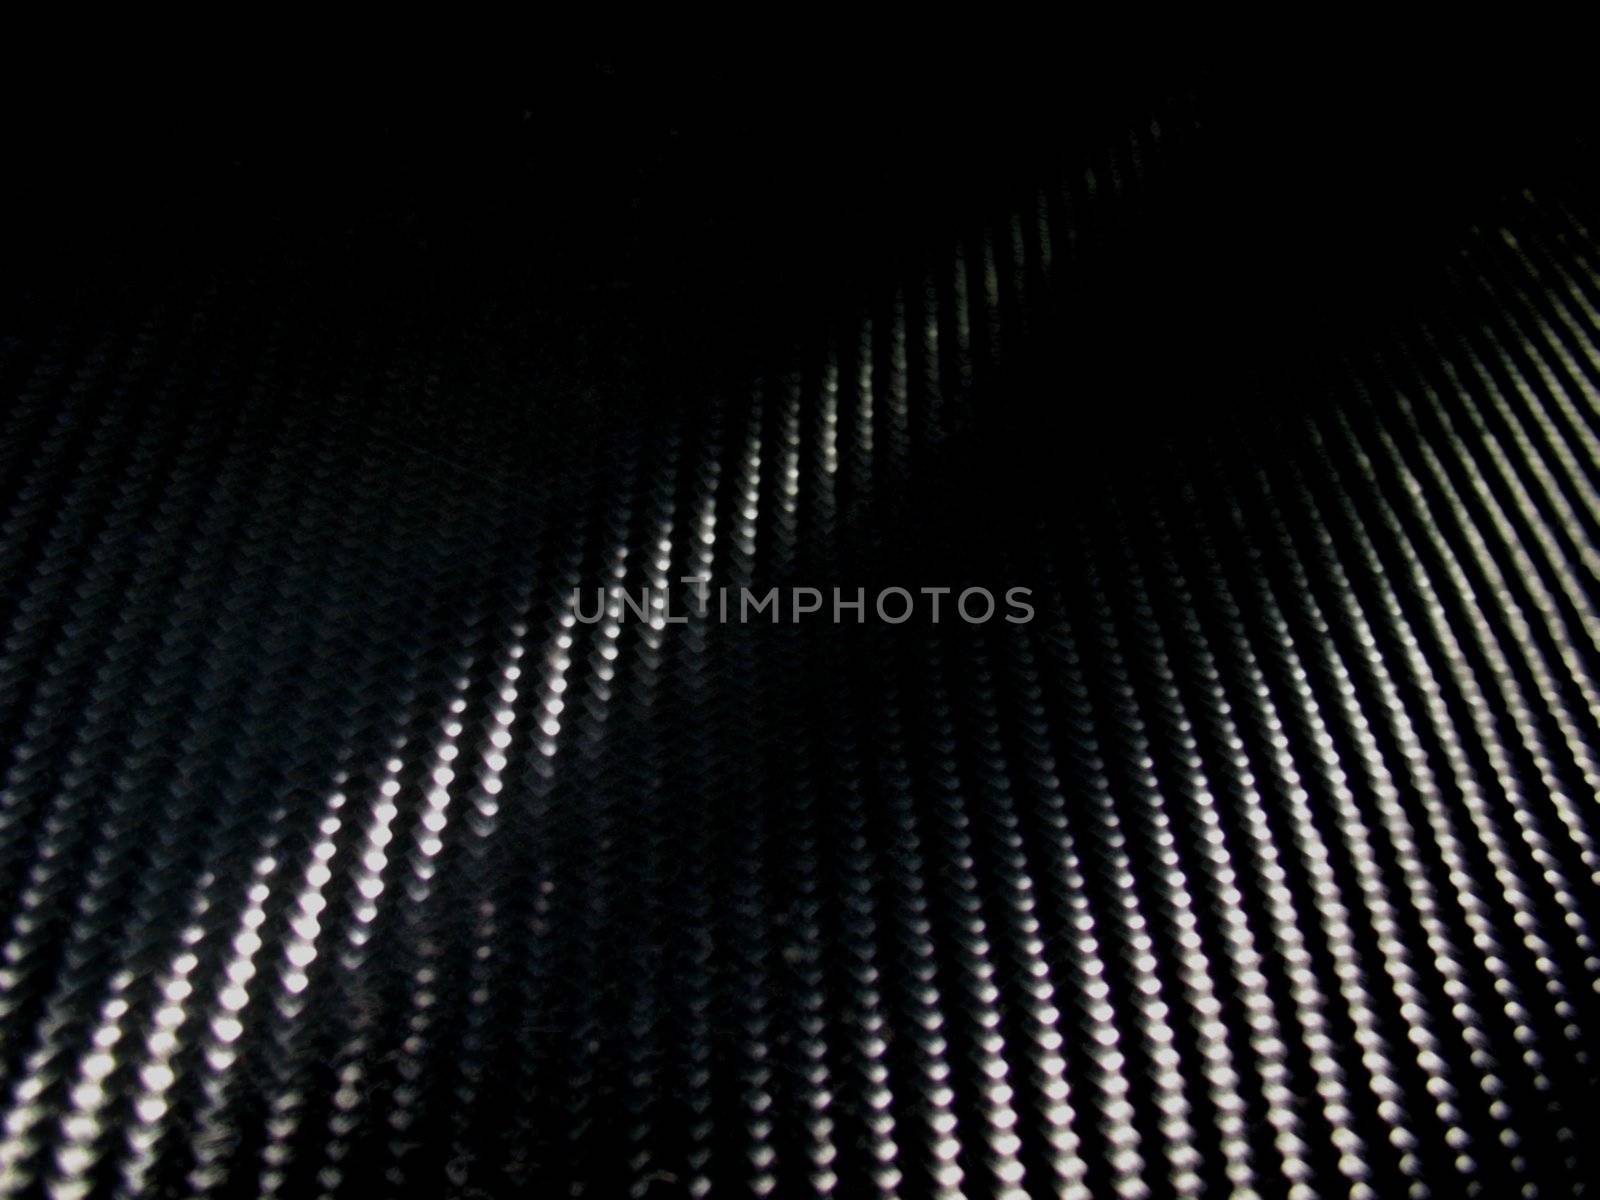 No fake stuff here...REAL high-res carbon fiber texture that you can apply in both print and web design.